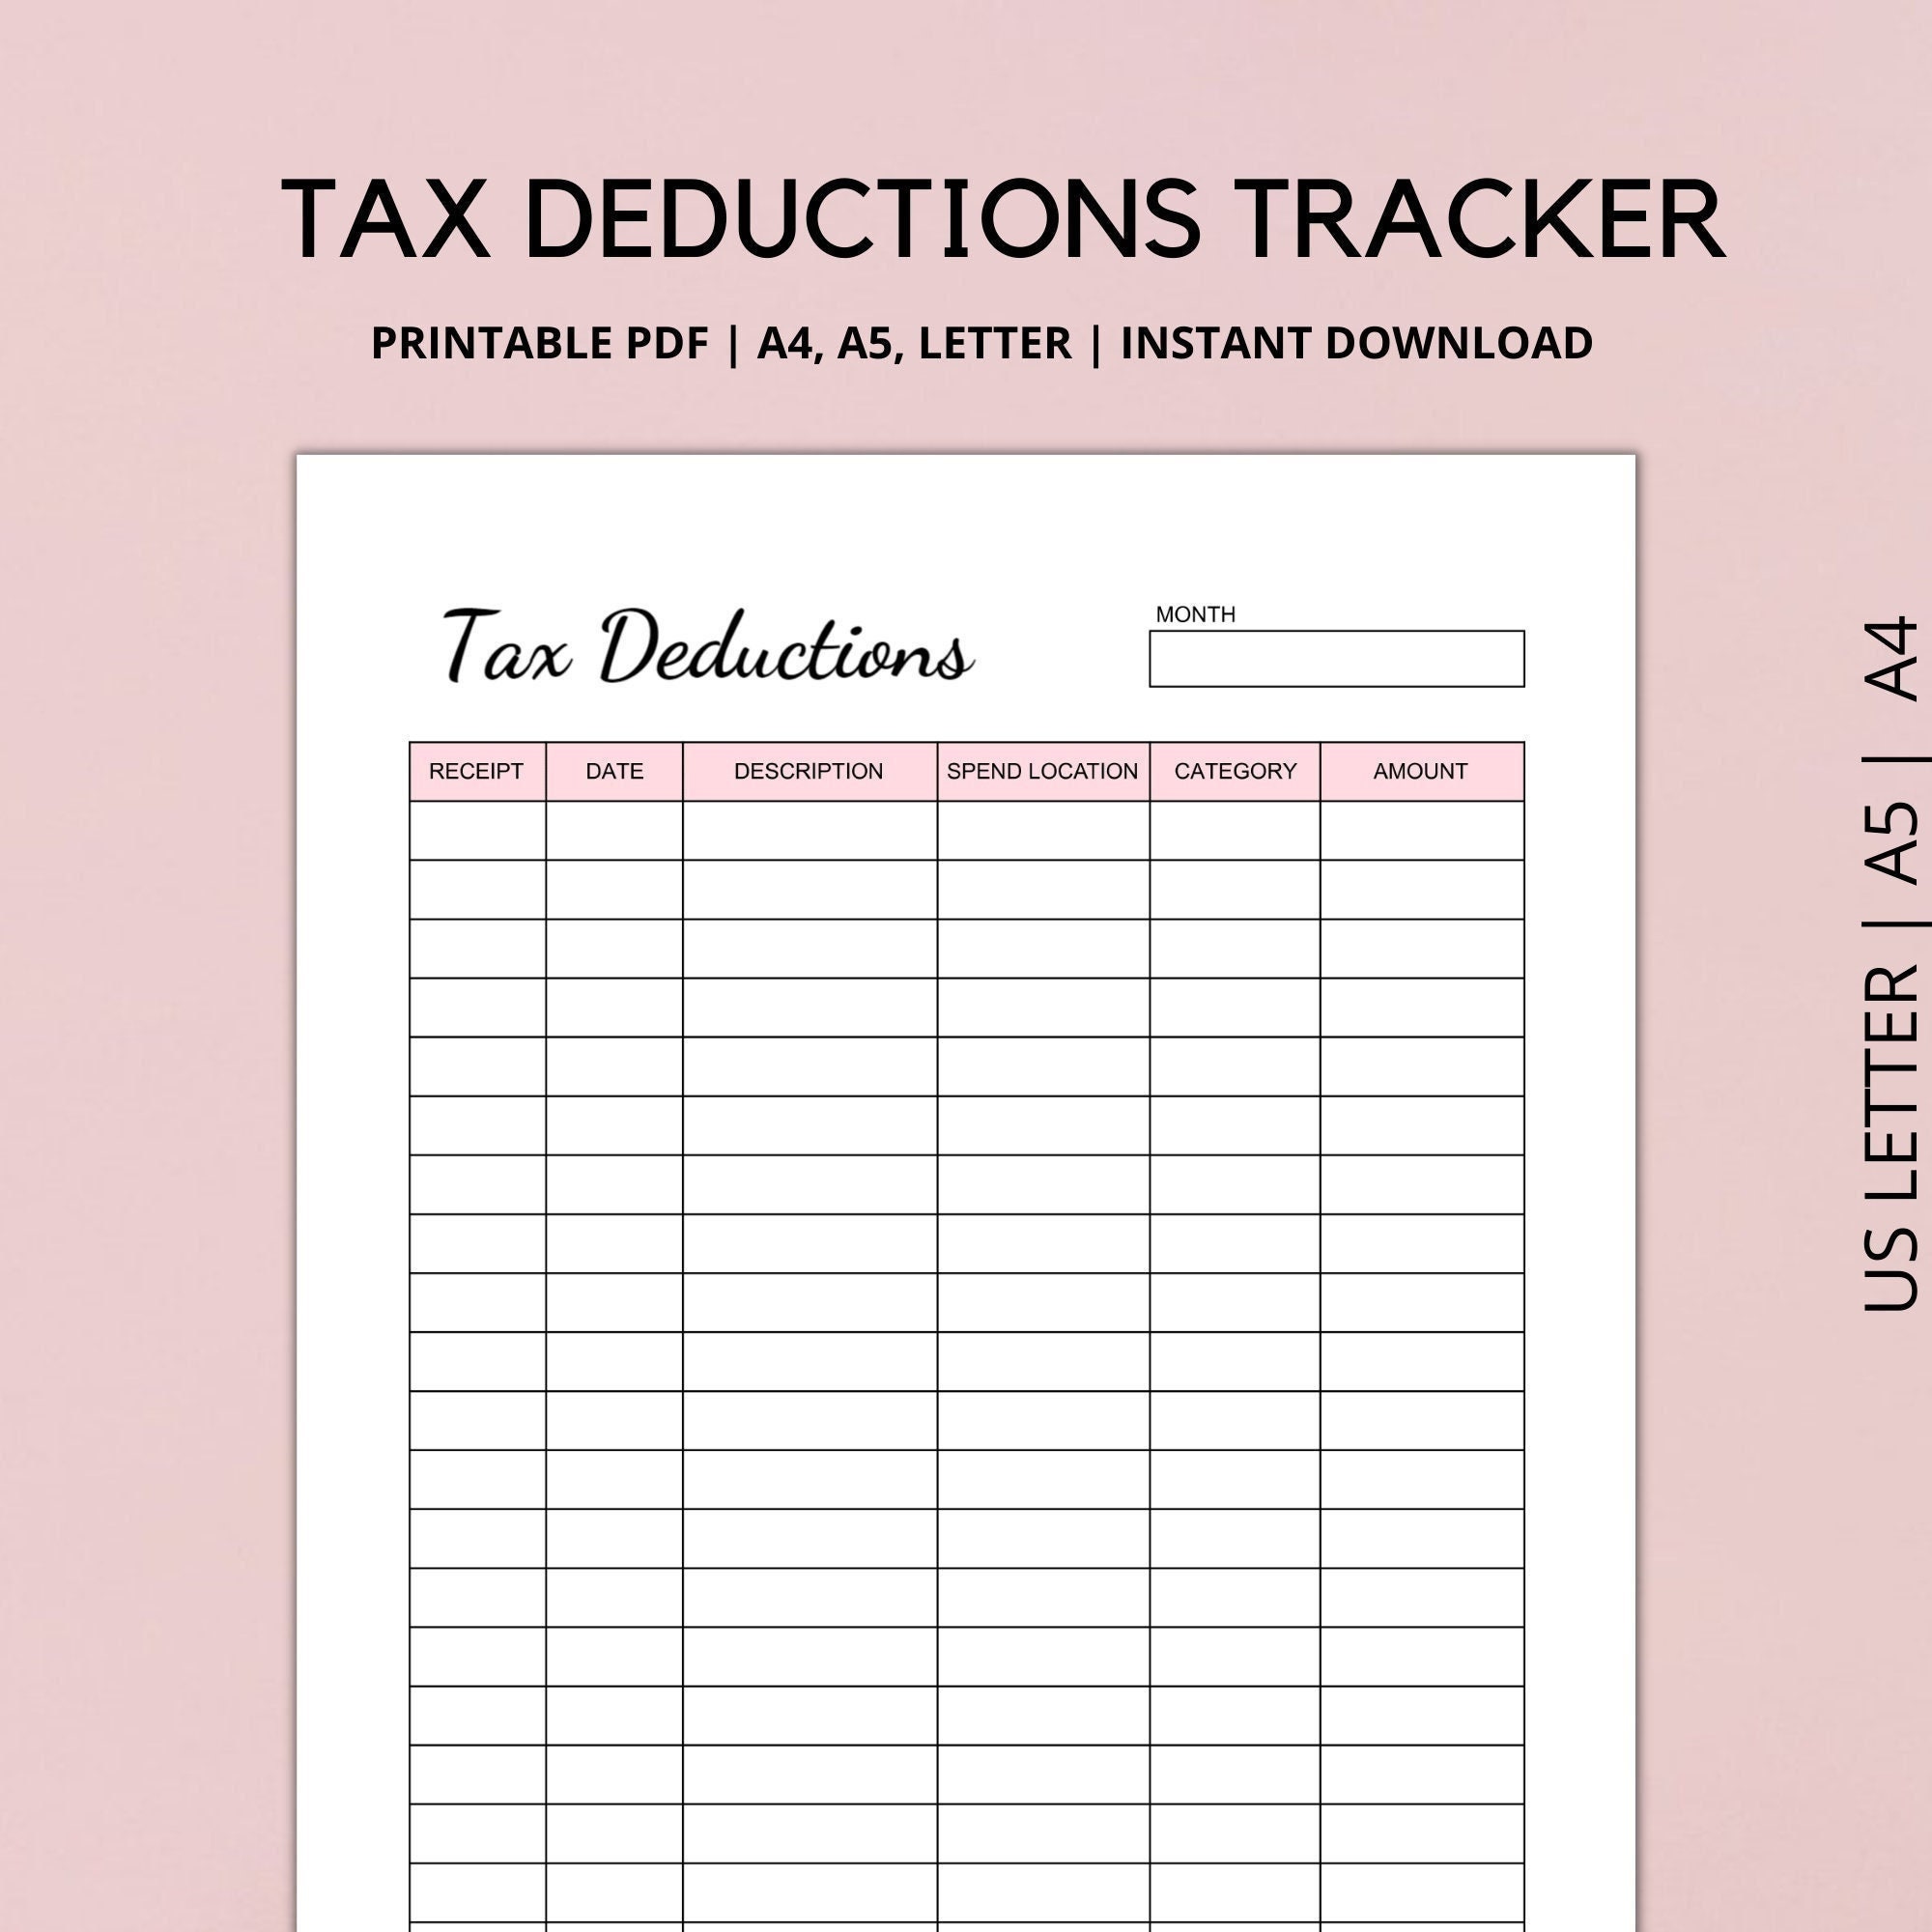 tax-deduction-tracker-printable-business-tax-log-expenses-etsy